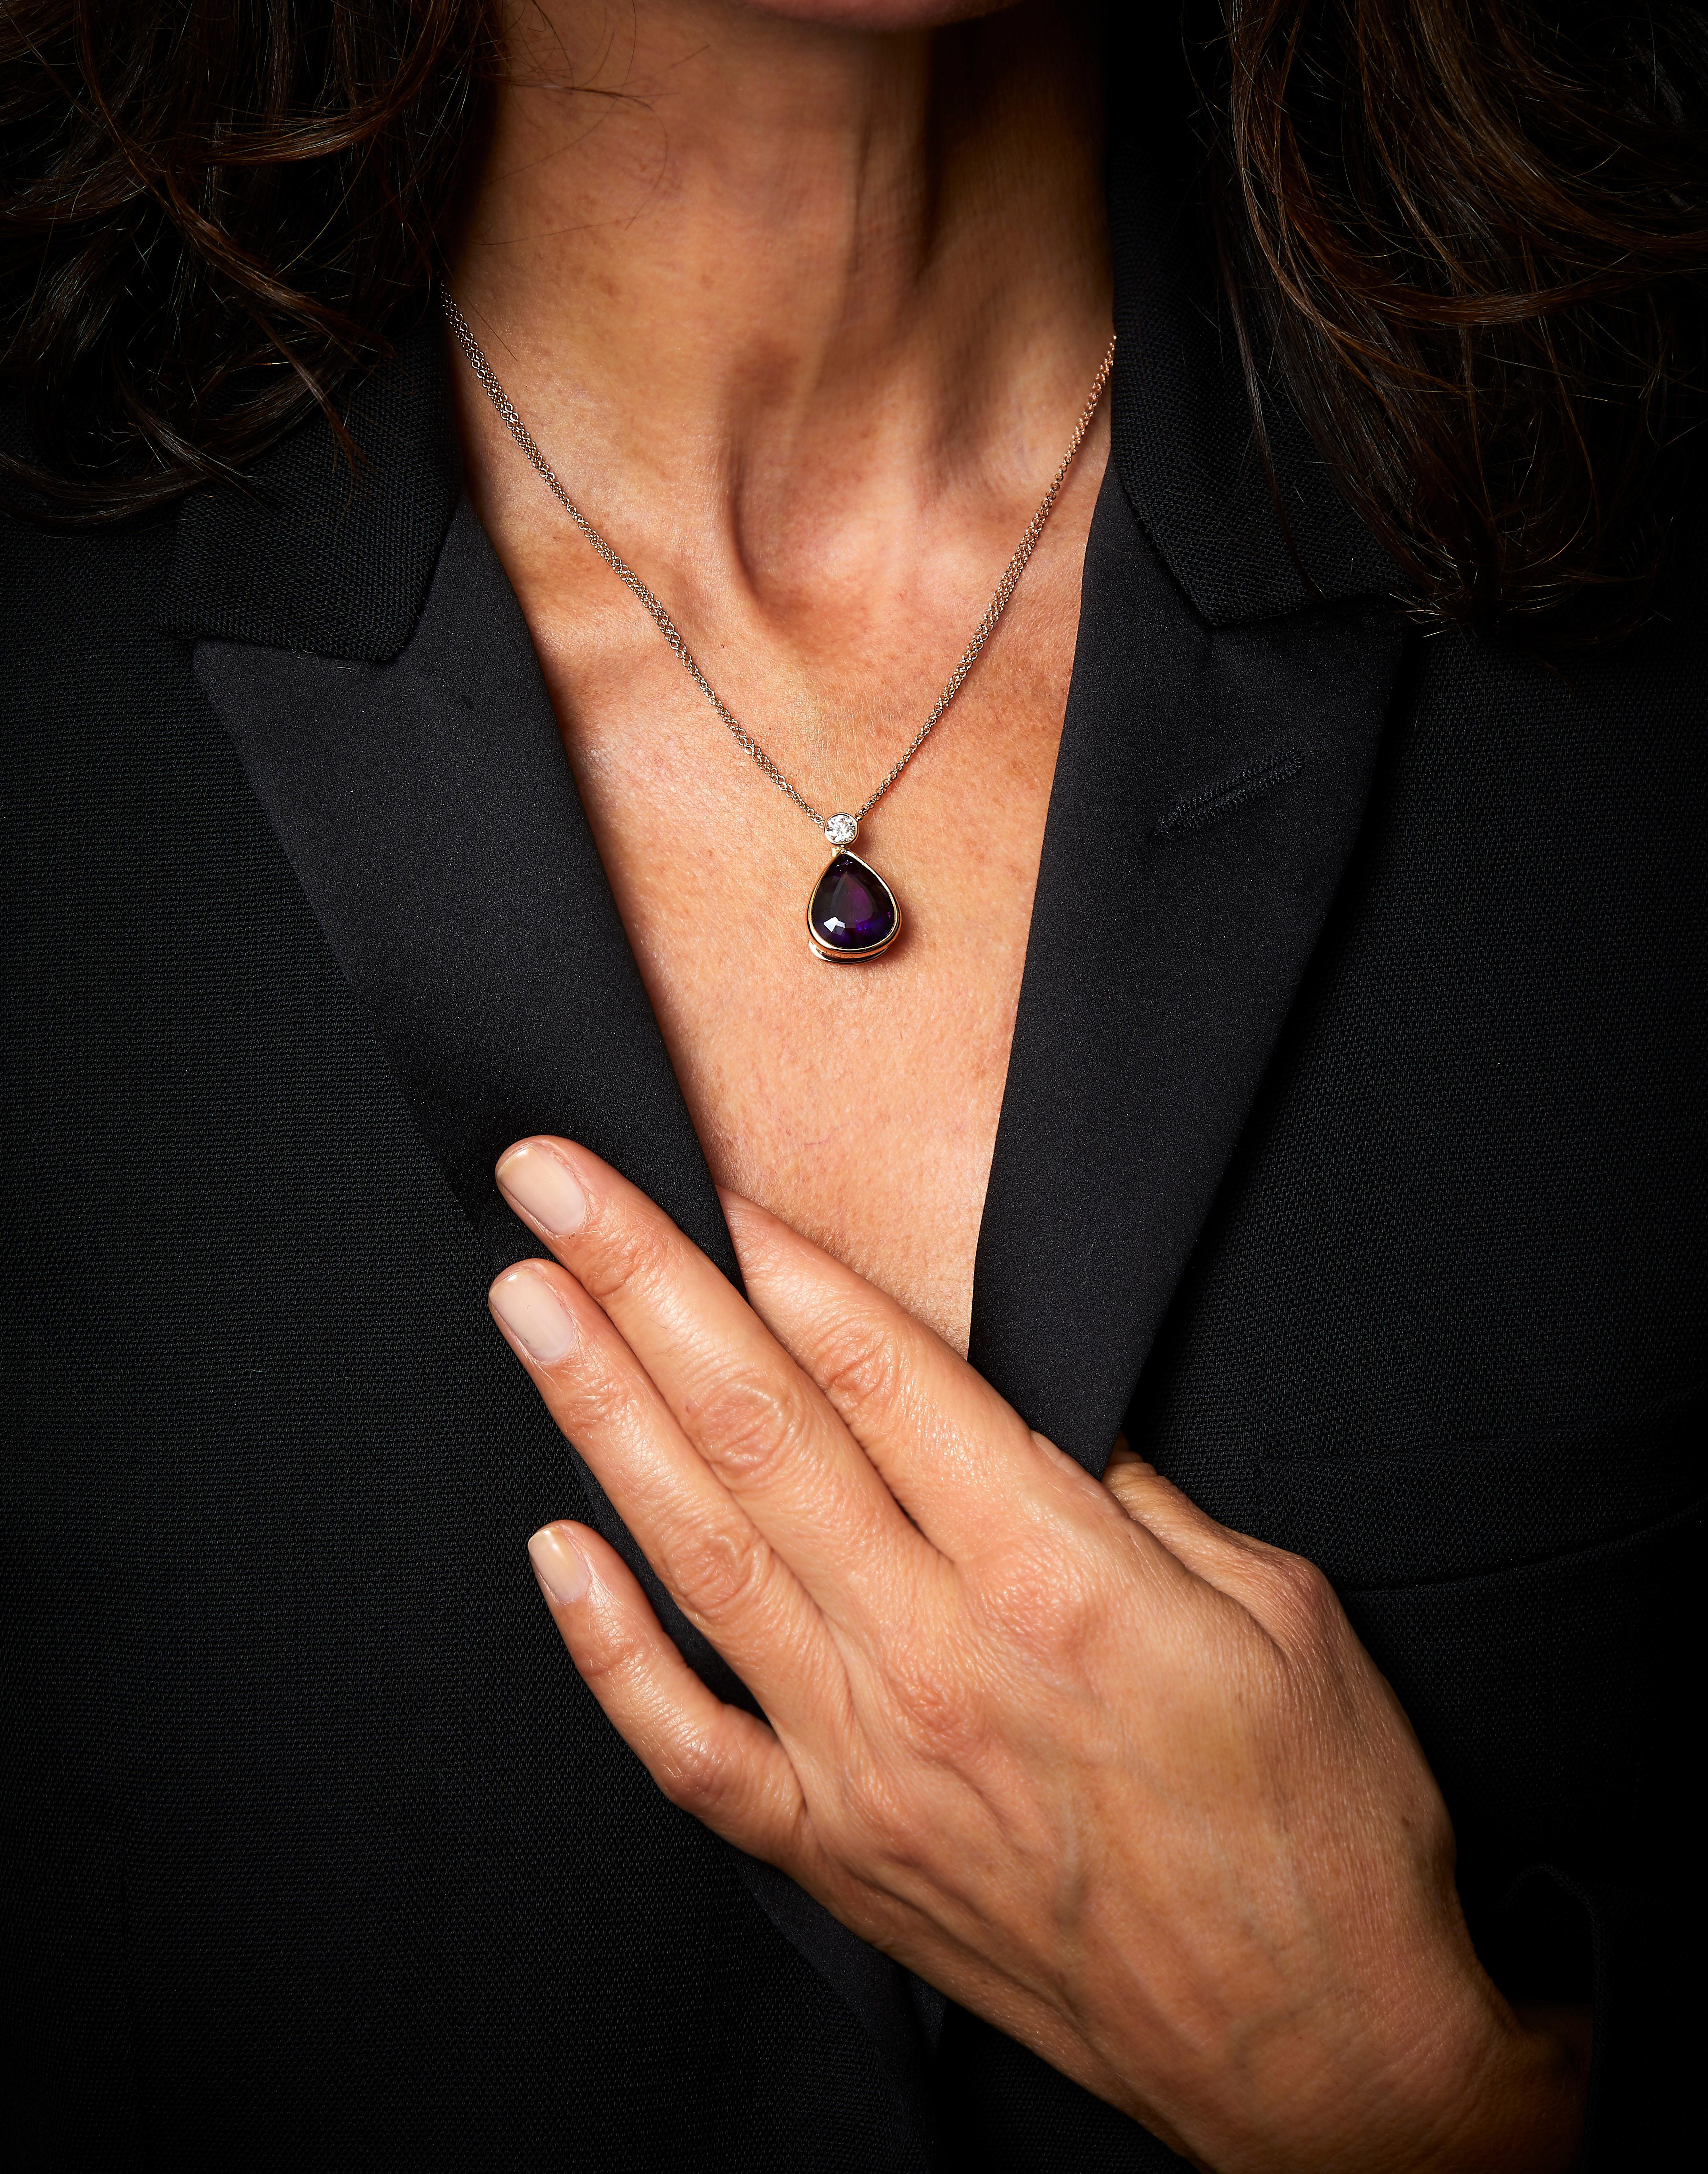 Designed by Eva Soussana, artist and founder of Hera-Jewellery, this sensual, elegant and refined pendant necklace from the 